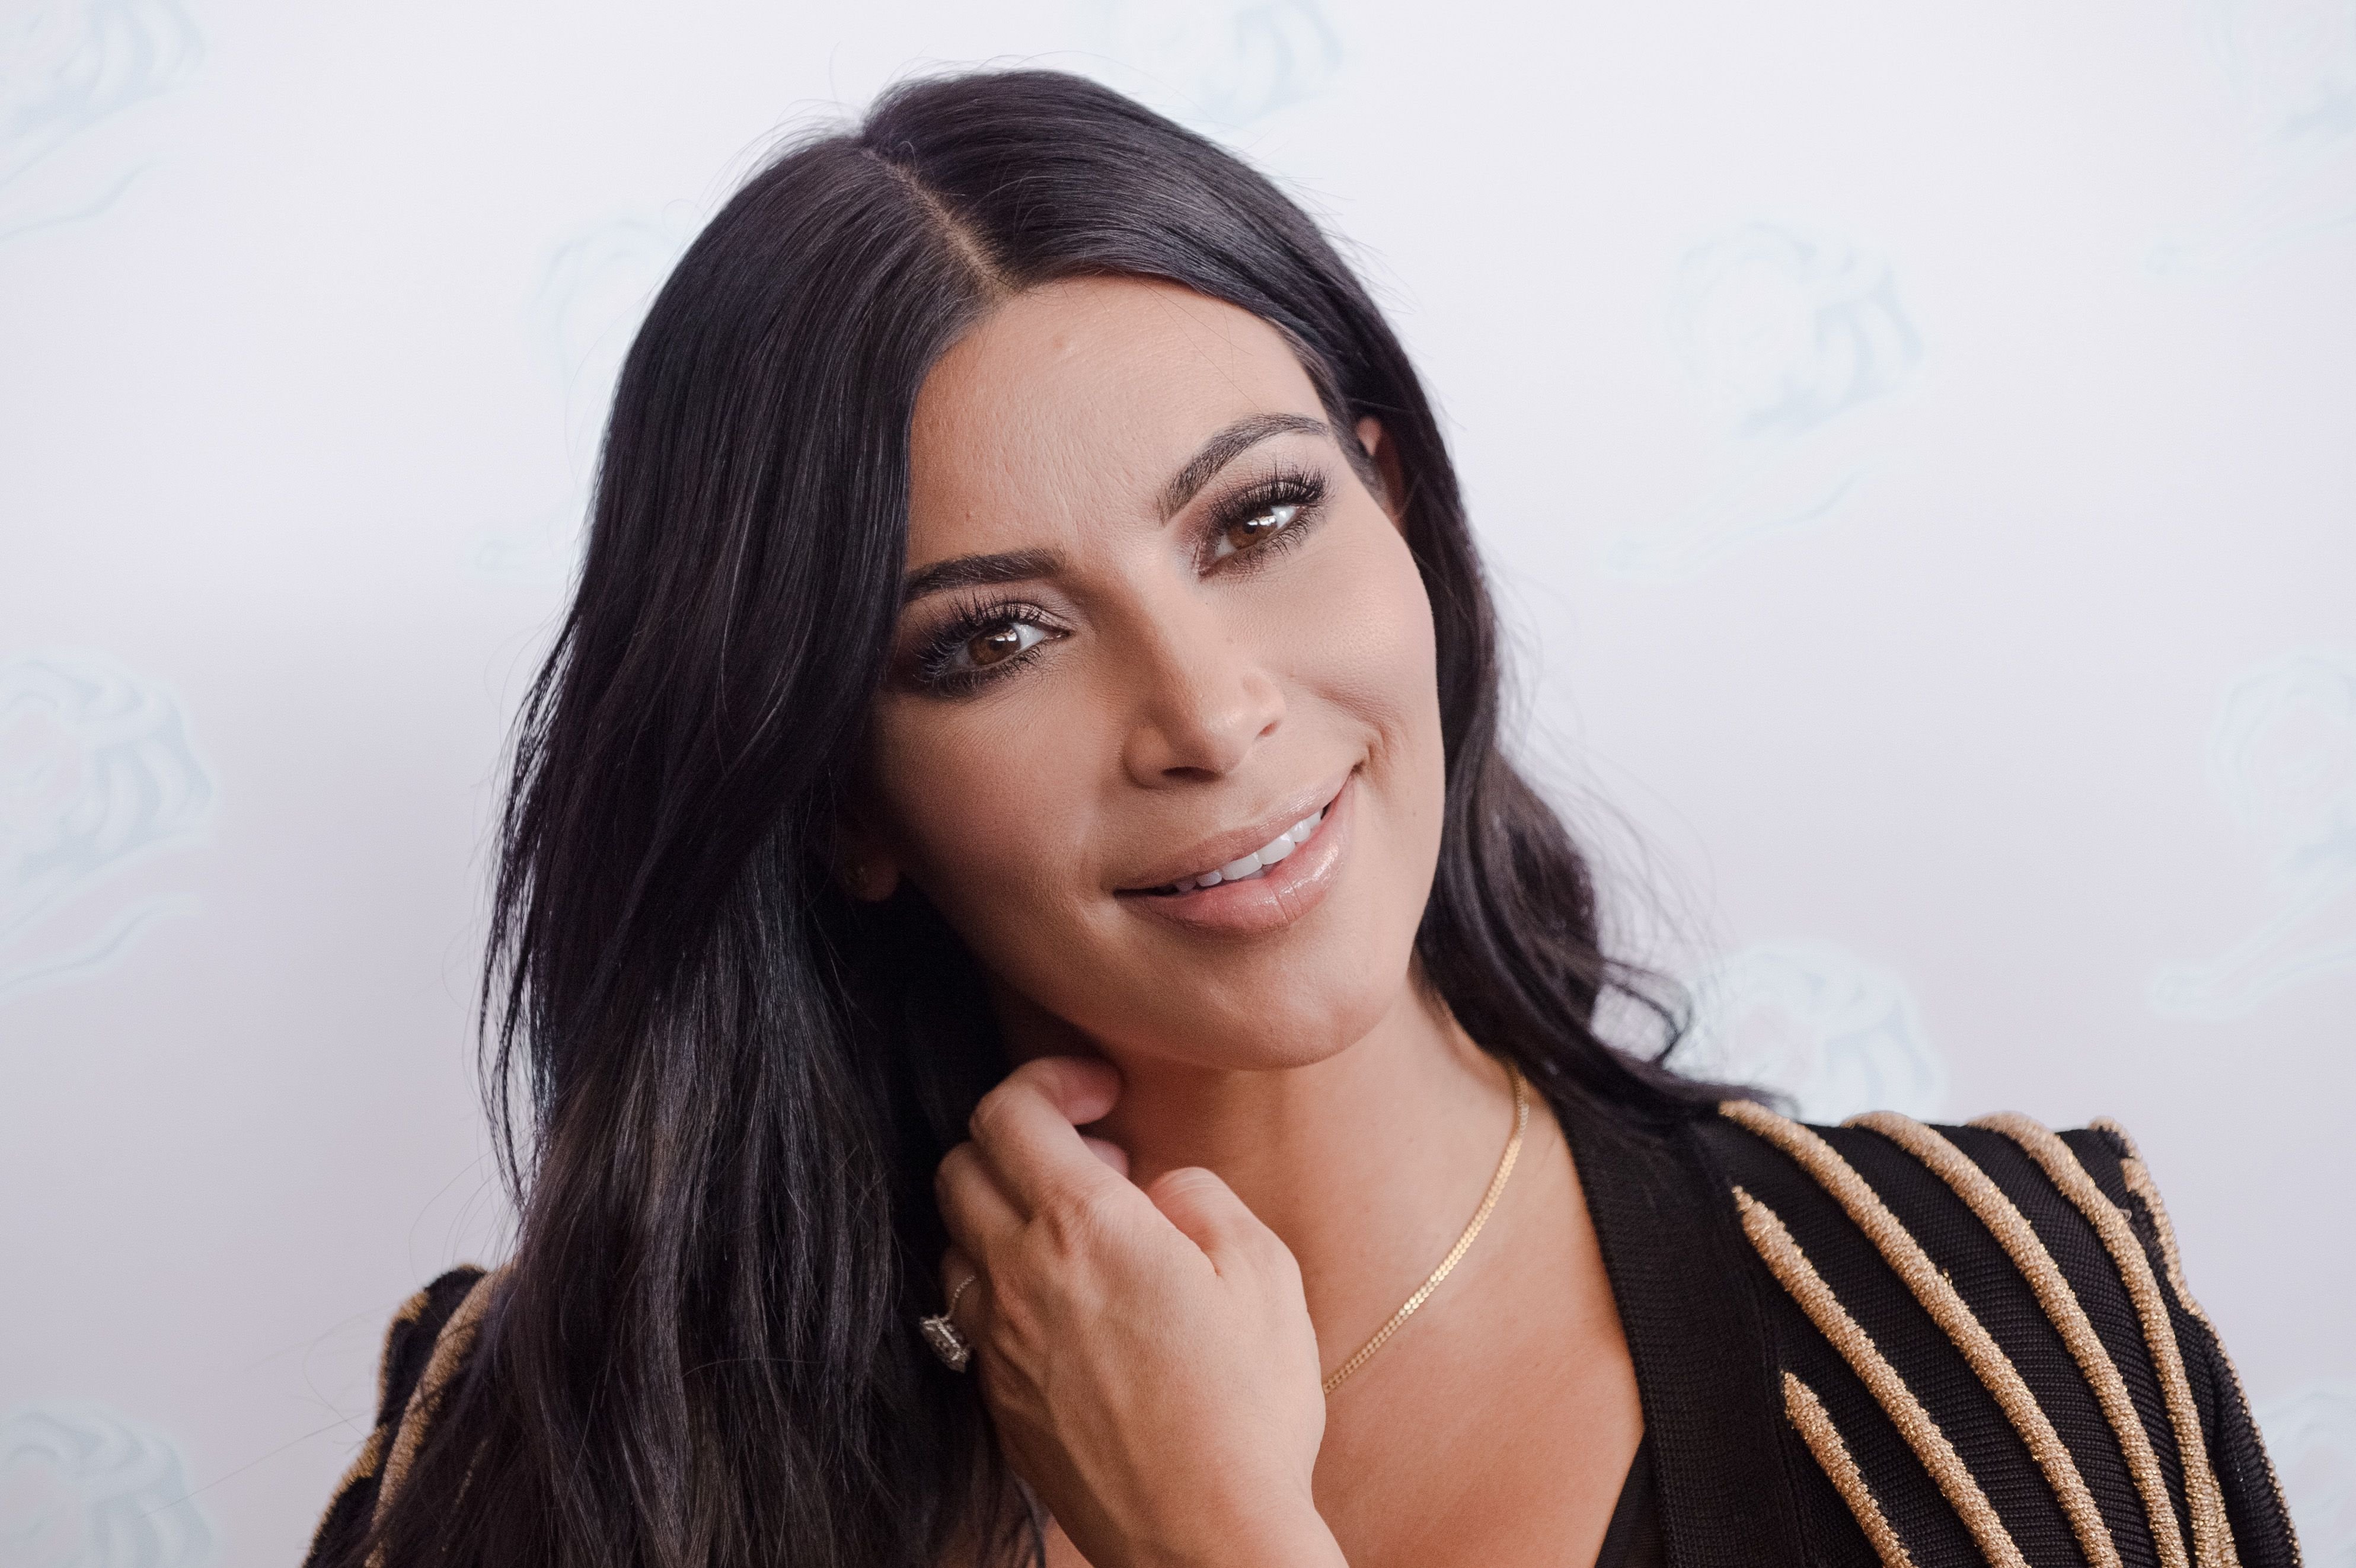 Kim Kardashian during a "Sudler" talk during the Cannes Lions International Festival of Creativity on June 24, 2015 in Cannes, France. | Source: Getty Images